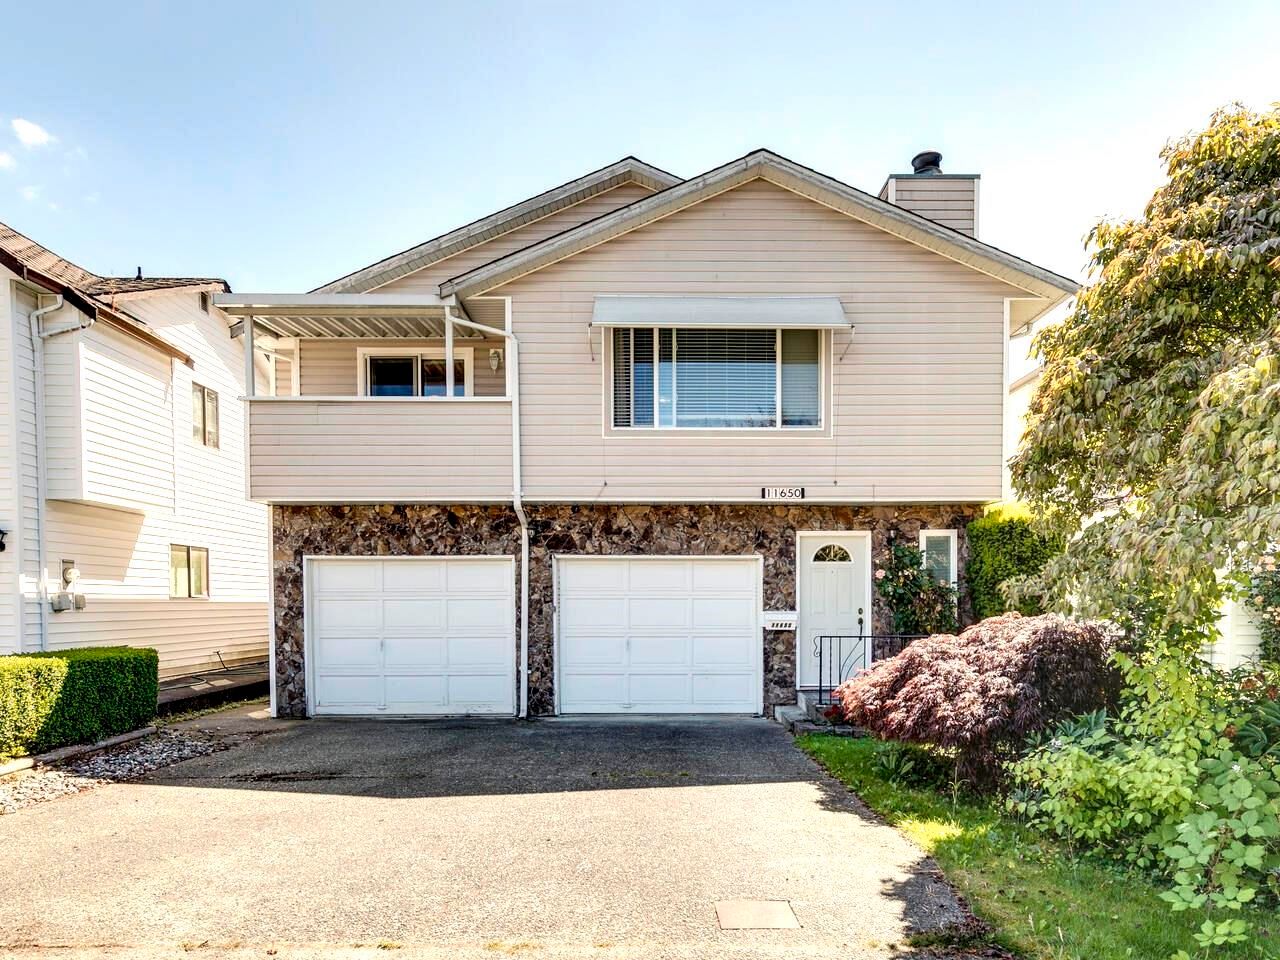 Open House on Sunday, September 11, 2022 12:00PM - 2:00PM
Gramma's house.  Spotless, gently lived in, a great location &amp; at this price this is a great buy for a serious Buyer.  See for yourself.  You'll be very glad you did!